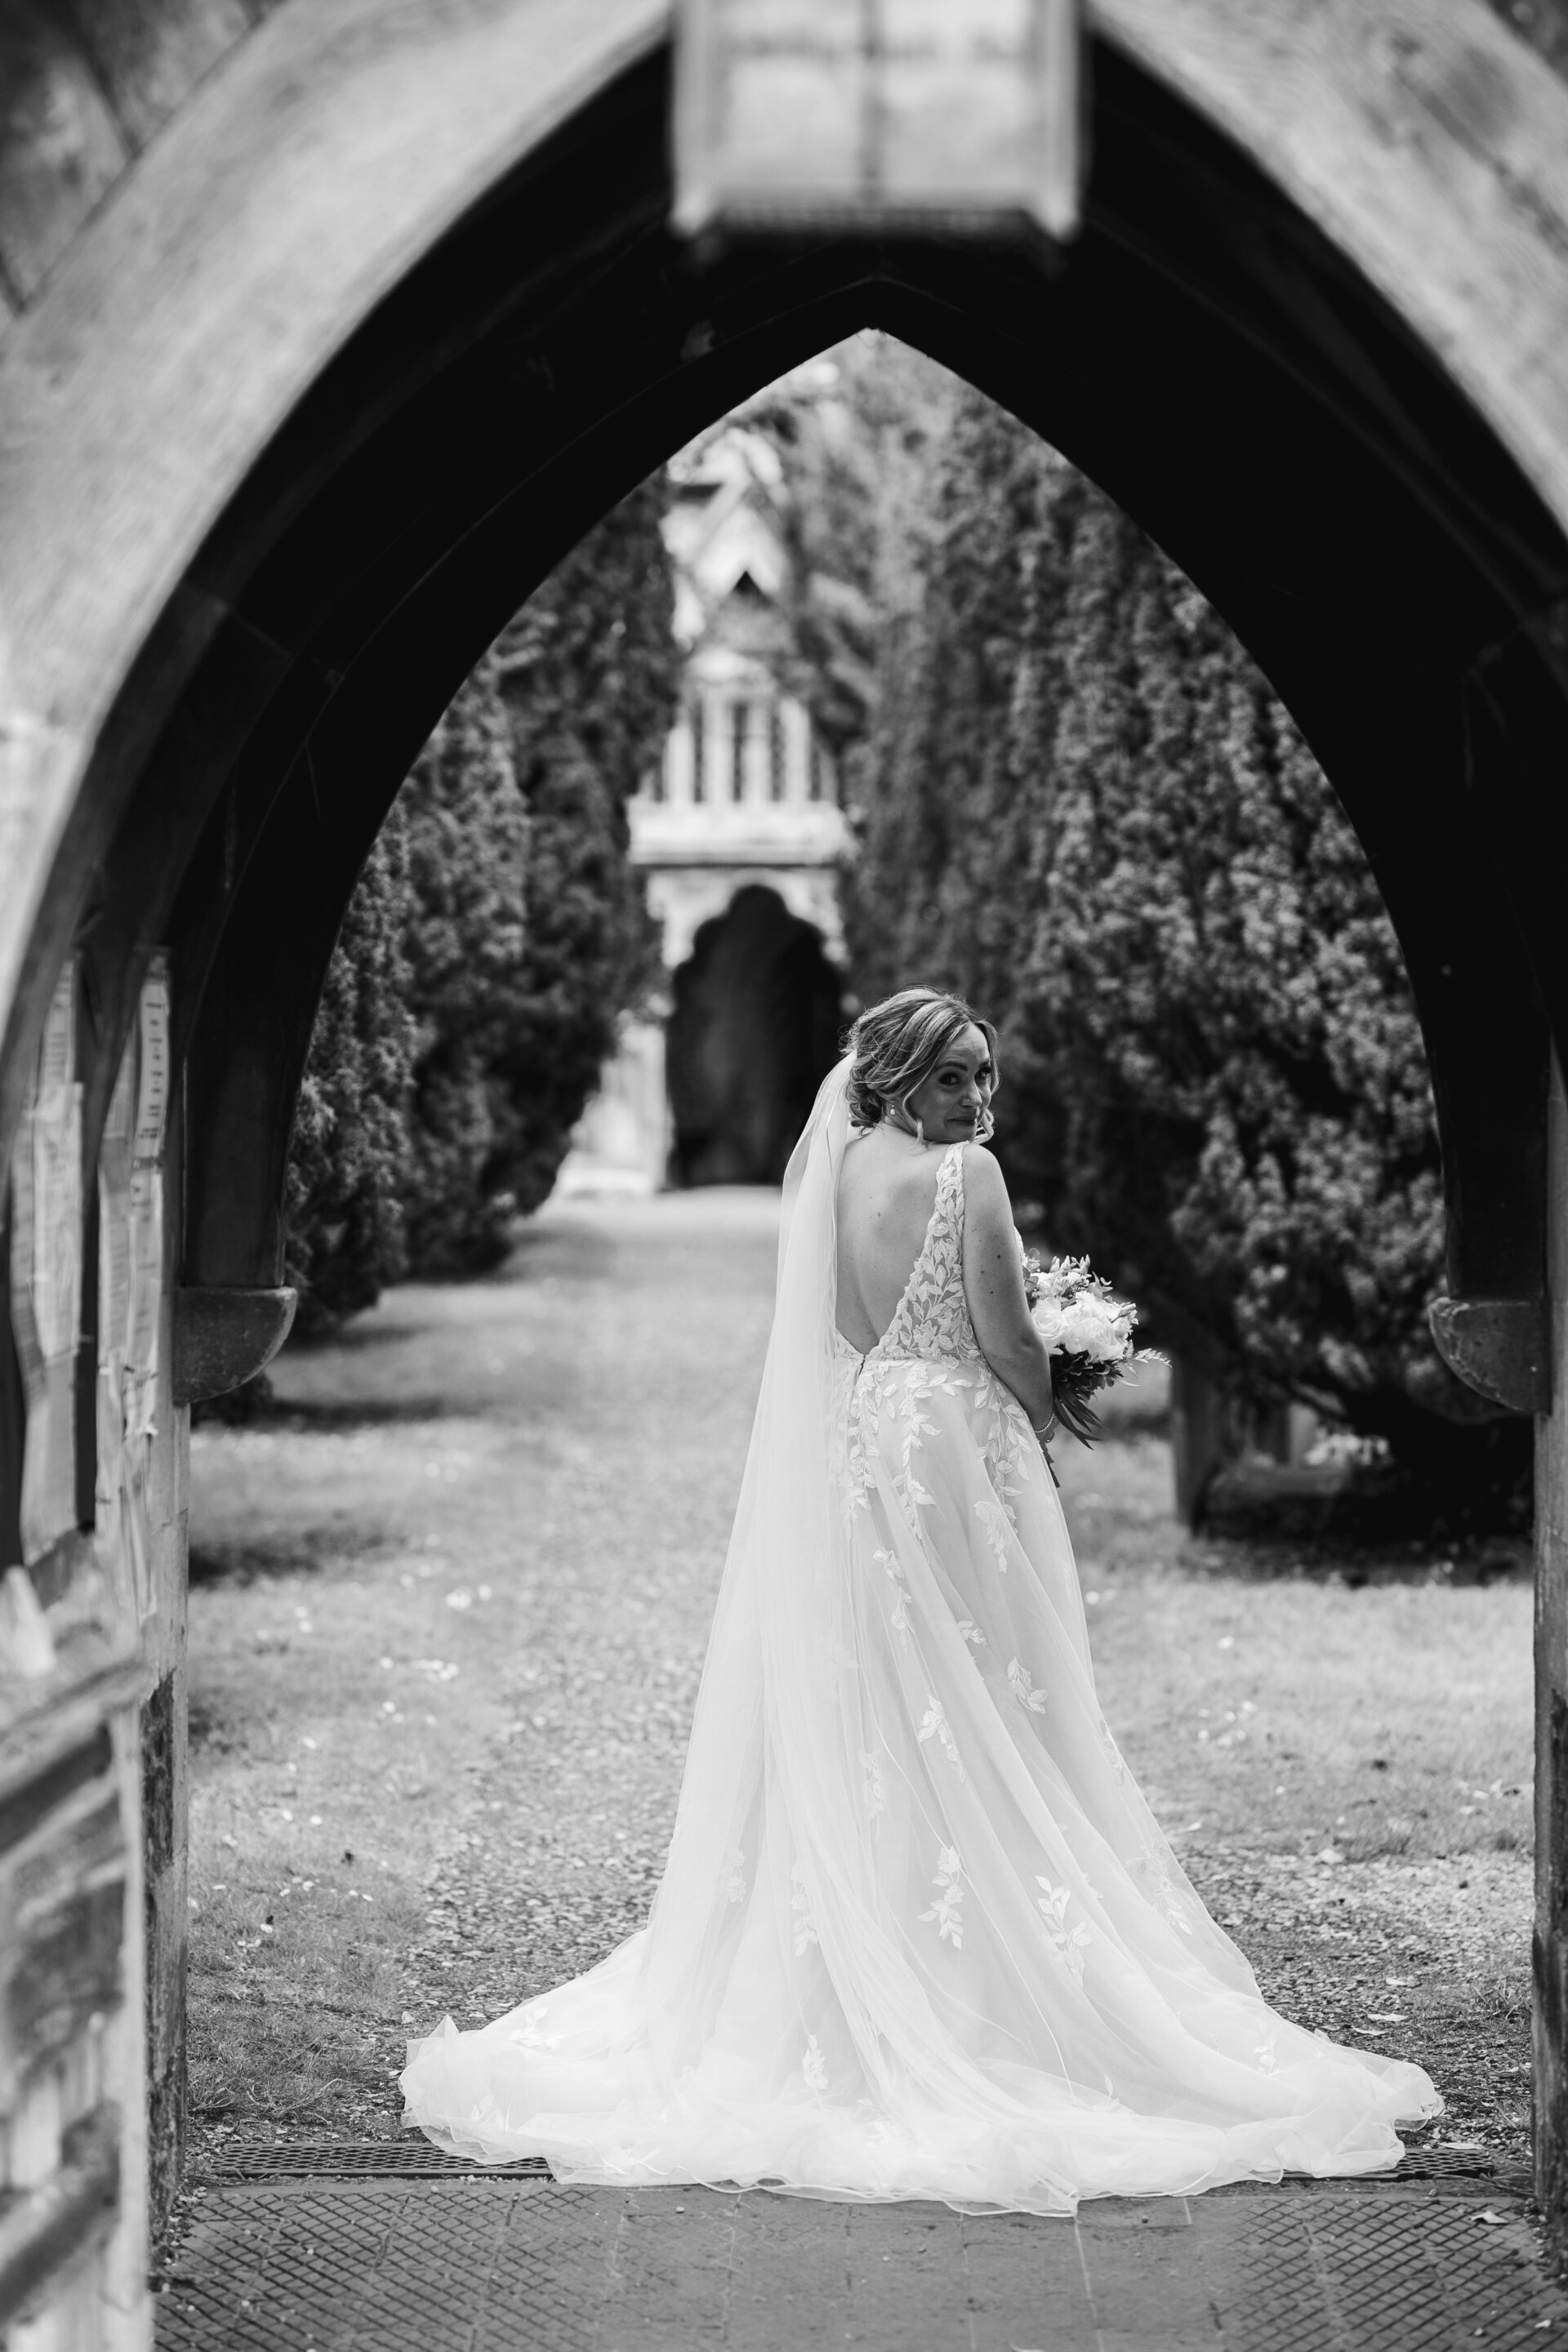 The bride approaches the church